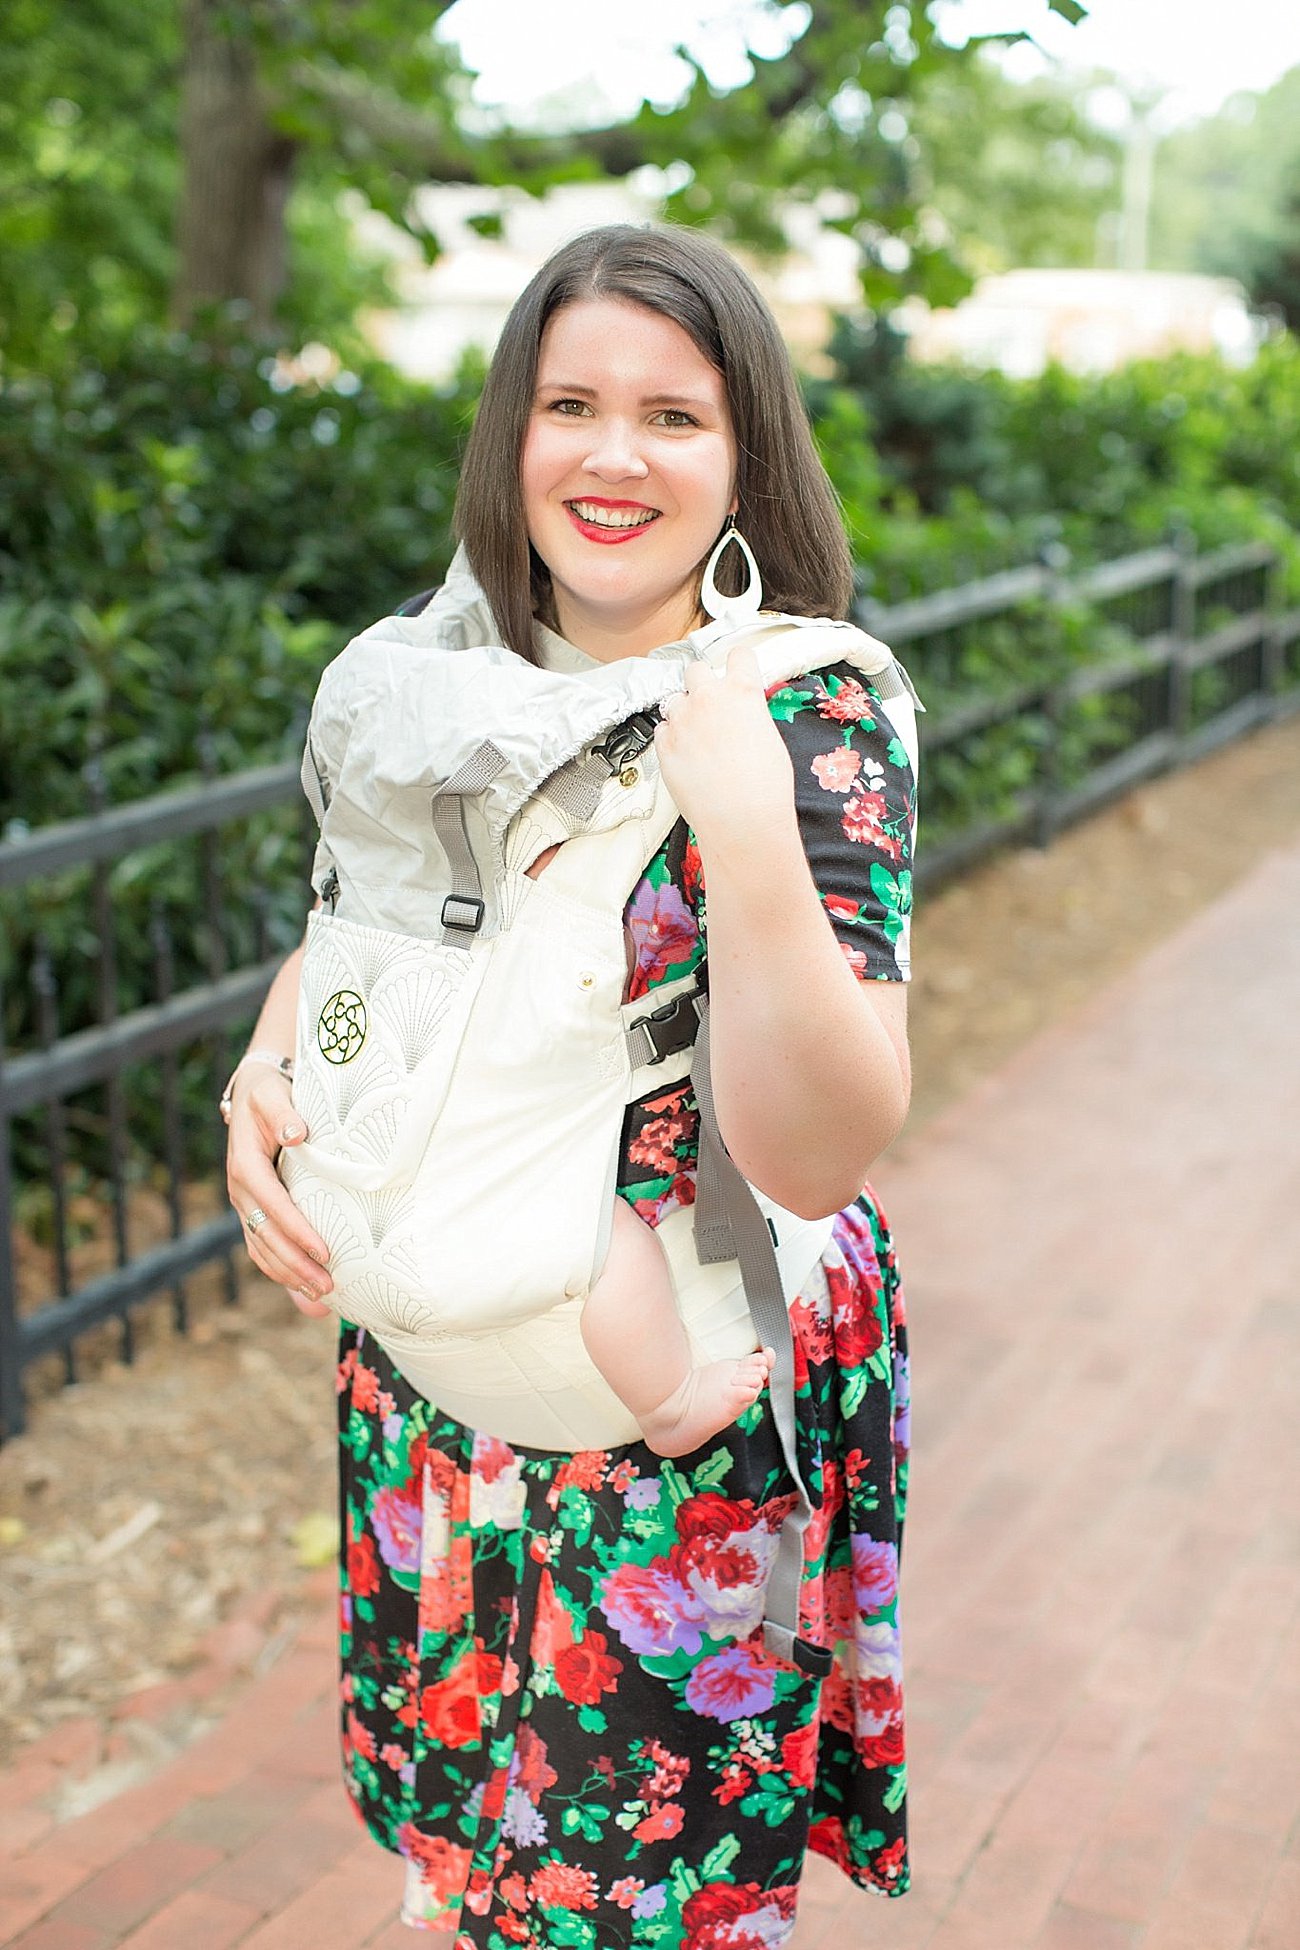 LulaRoe floral Amelia dress, Lillebaby Complete Embossed Luxe carrier in Brilliance, The Root Collective shoes, Kalencom "Berlin" Diaper Bag | North Carolina Fashion Blogger (10)